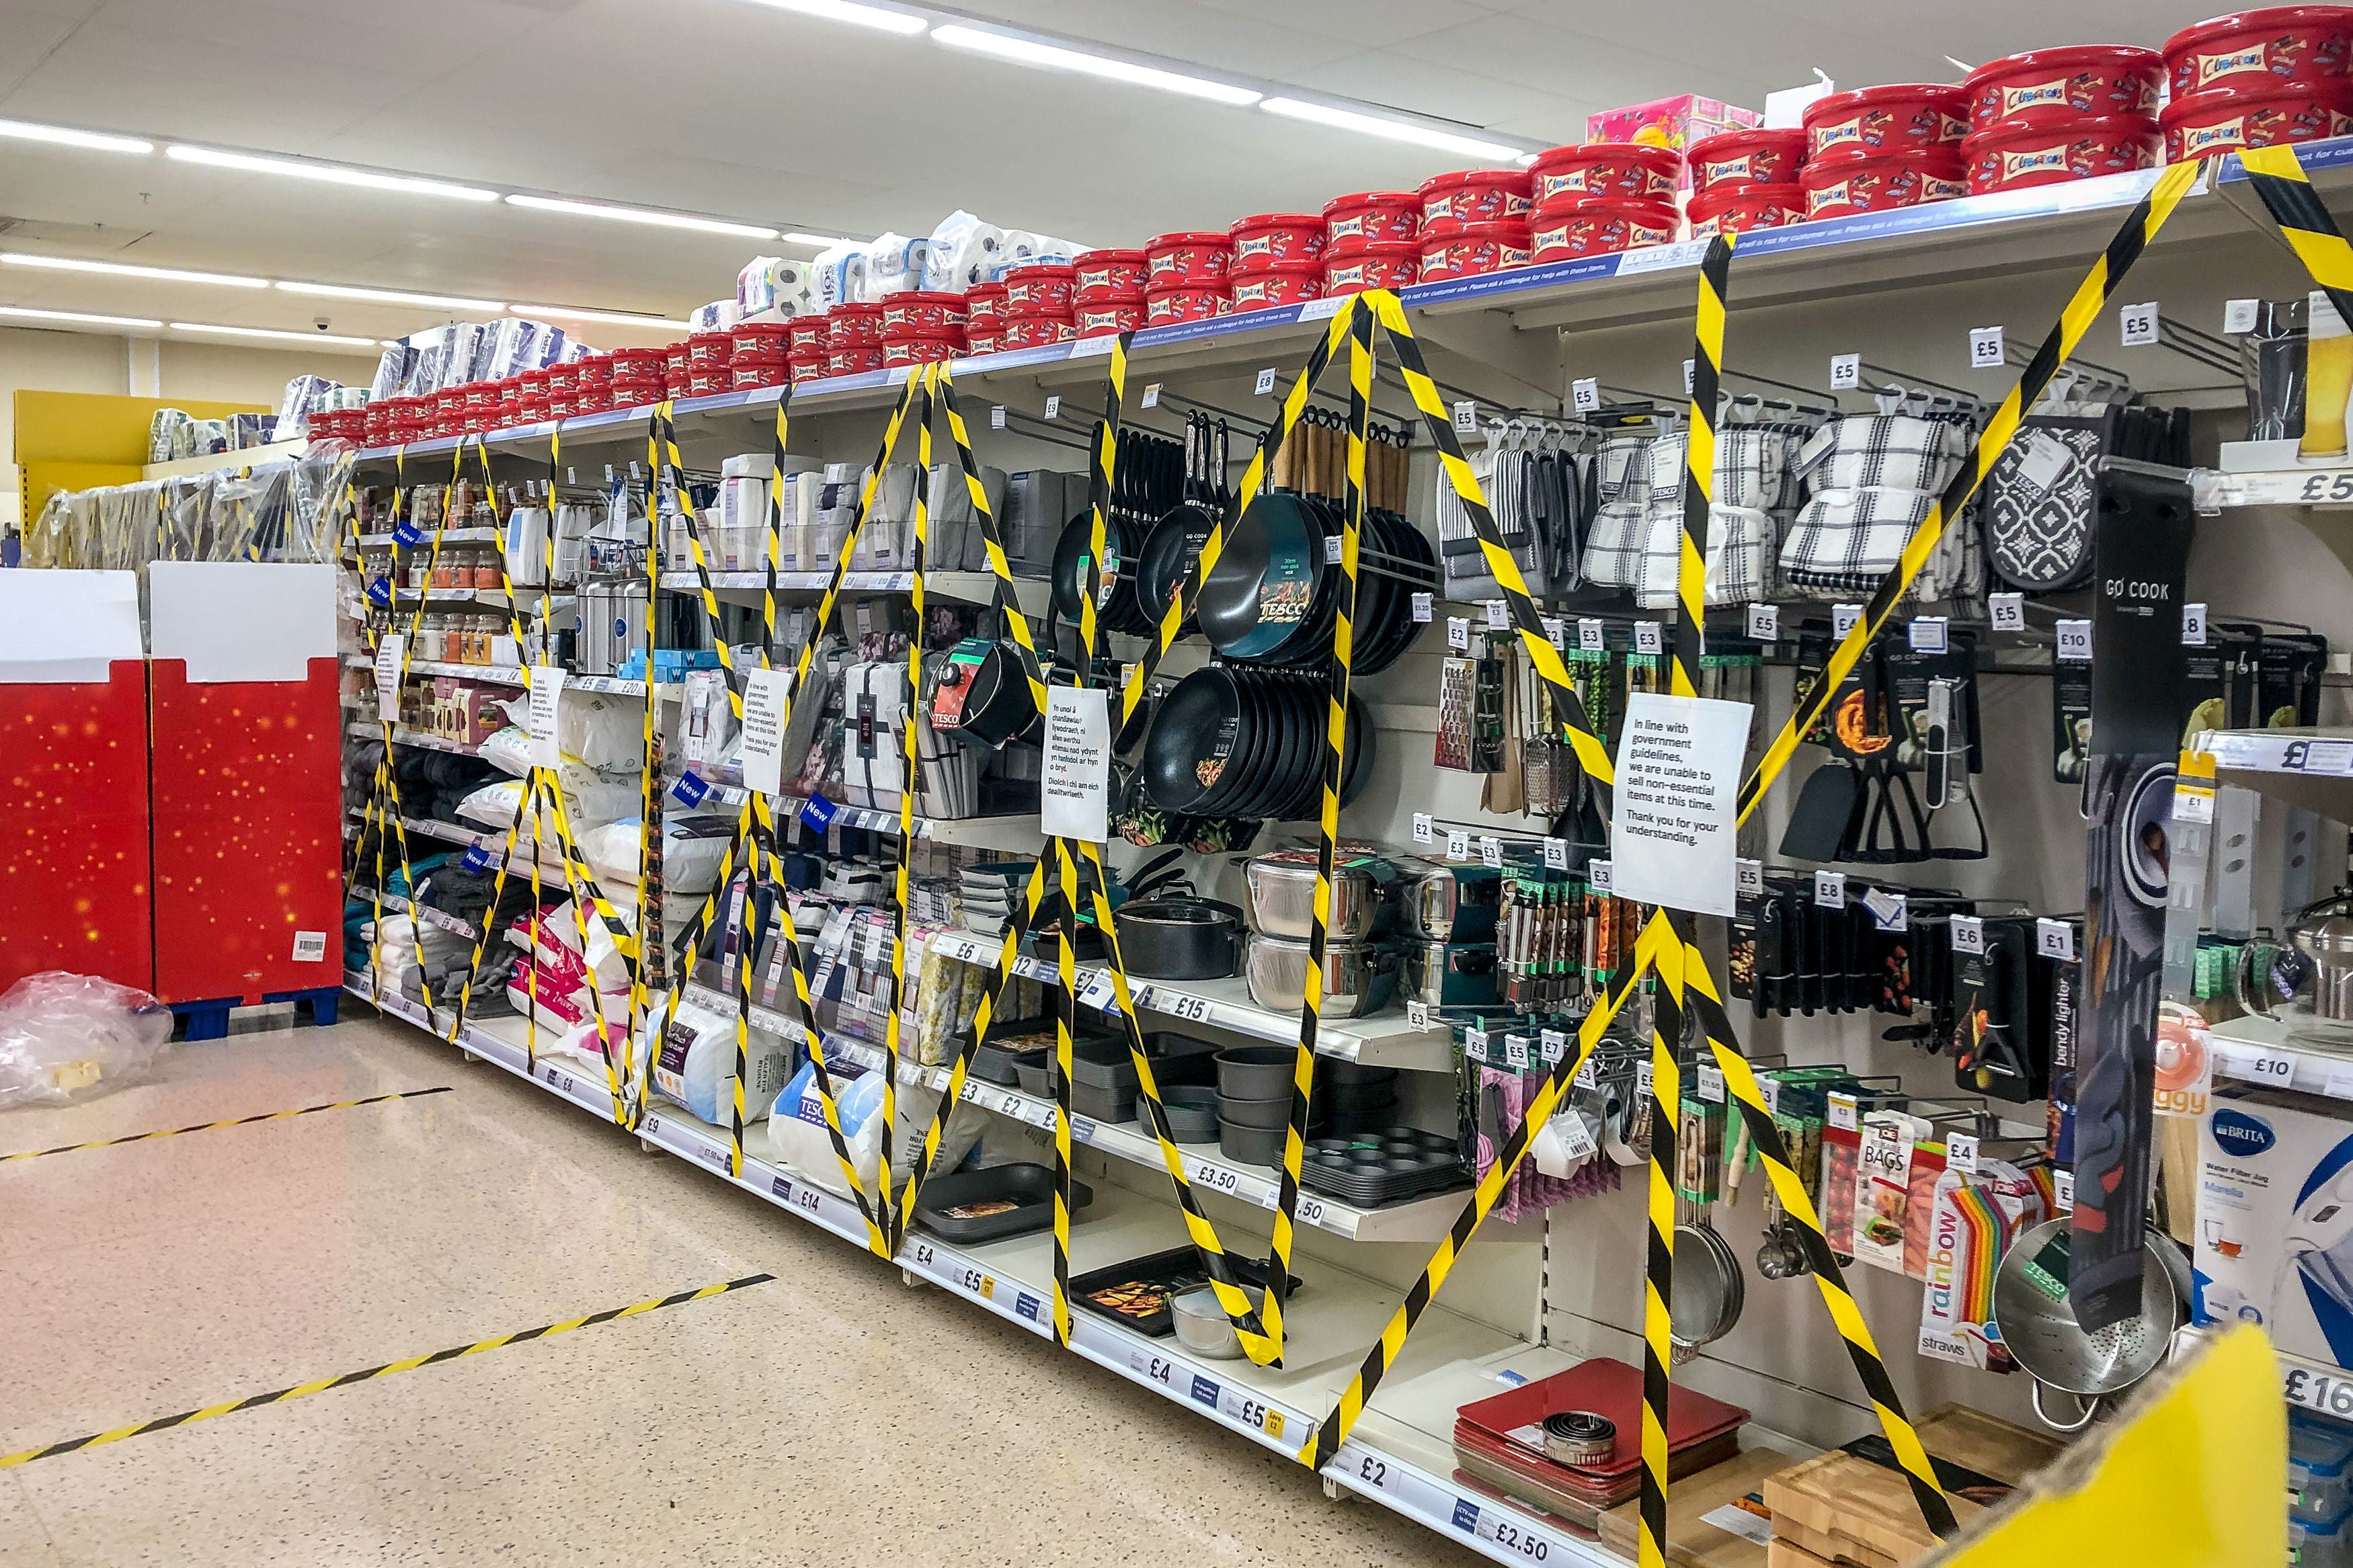 Supermarkets in Wales have been told to remove or cordon off ‘non-essential’ items